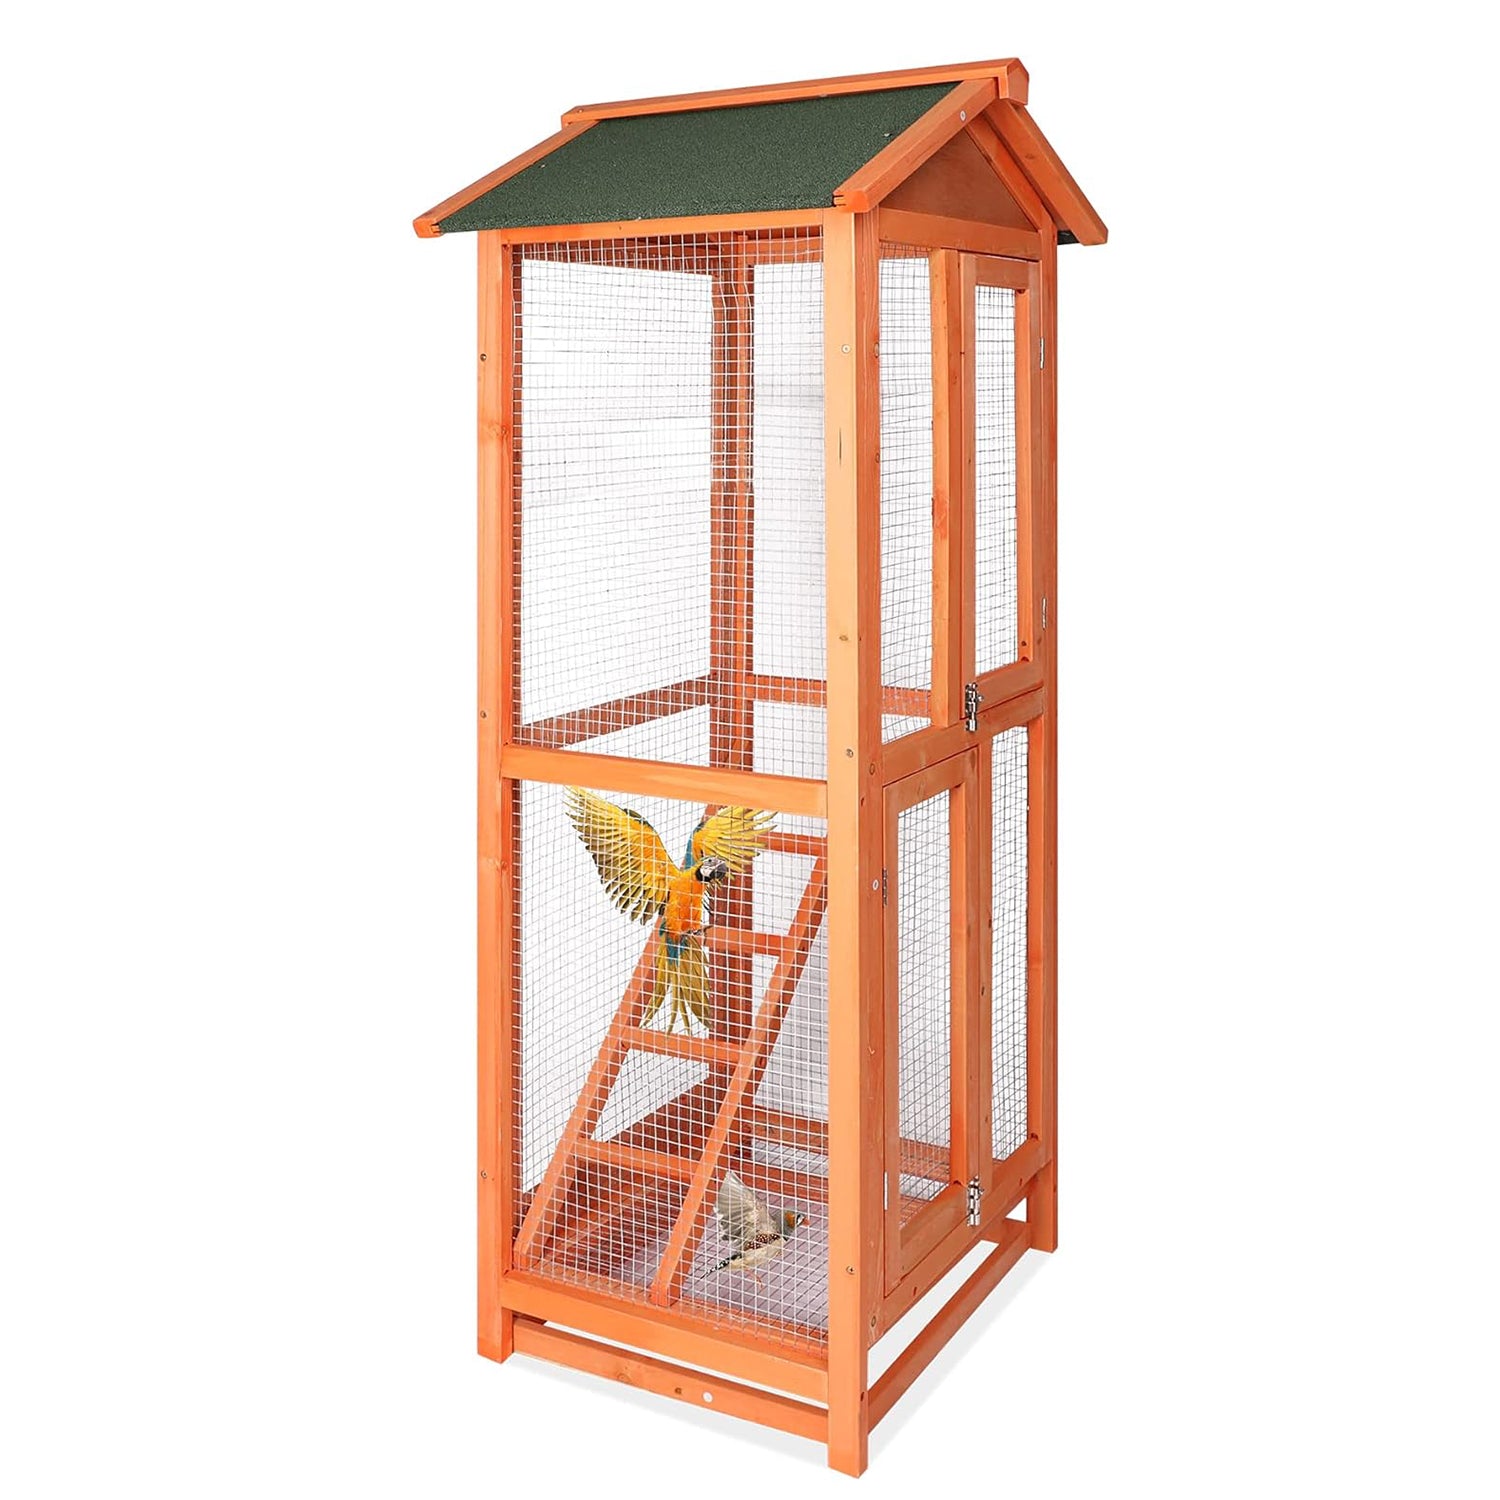 Wooden Large Bird Cage Pet Play Covered House Ladder Feeder Stand Outdoor